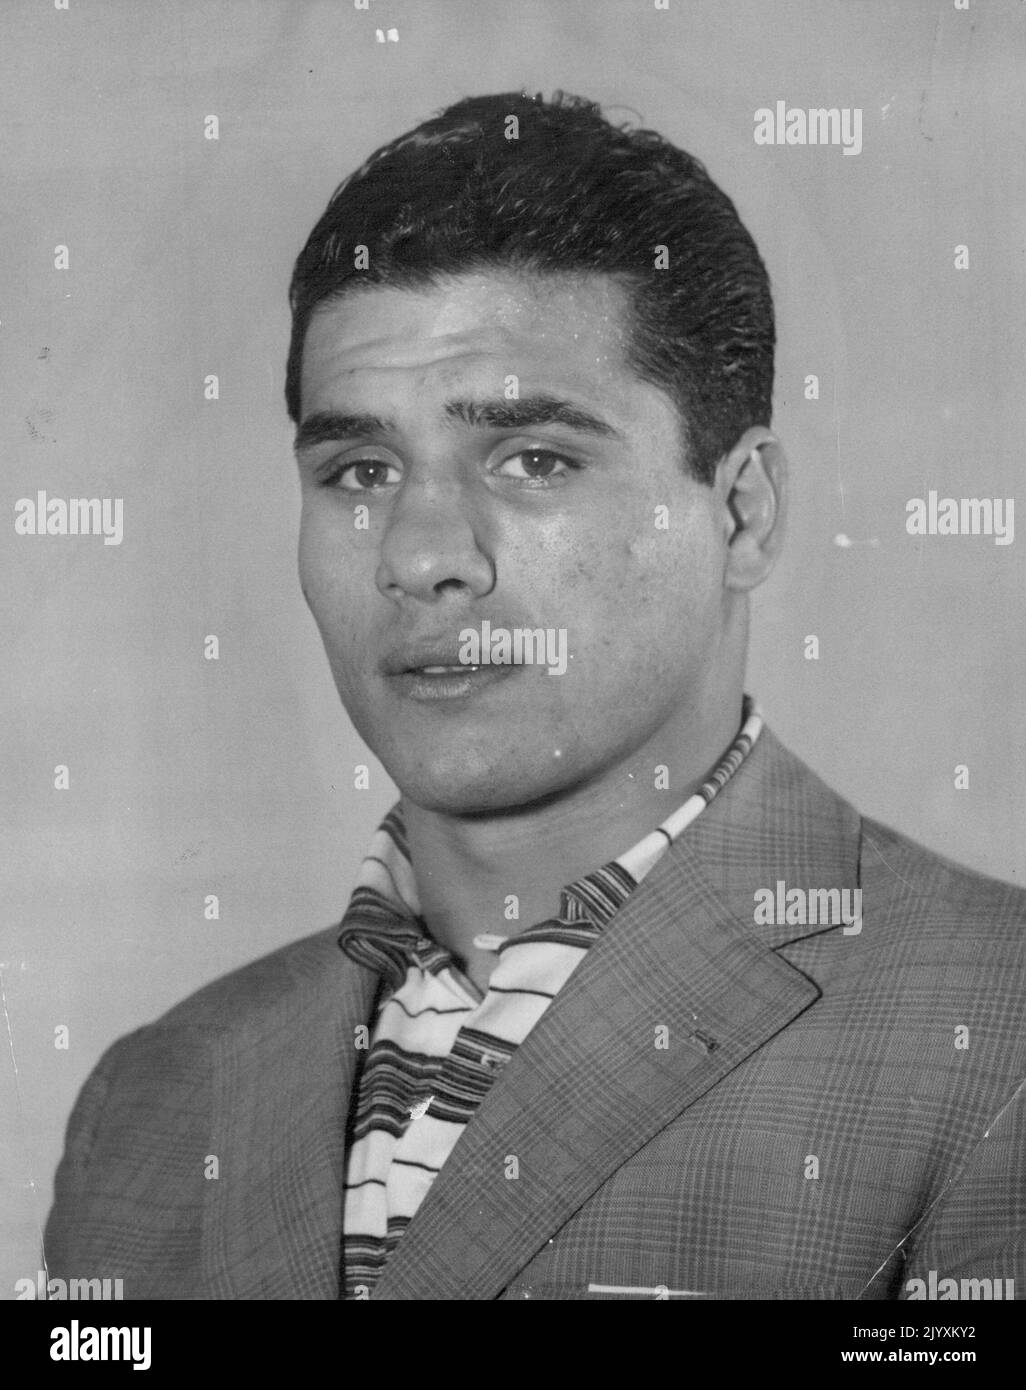 Italian boxer Italo Scortichini who arrived yesterday for fights at the White City. He will meet George Barnes. March 25, 1955. Stock Photo